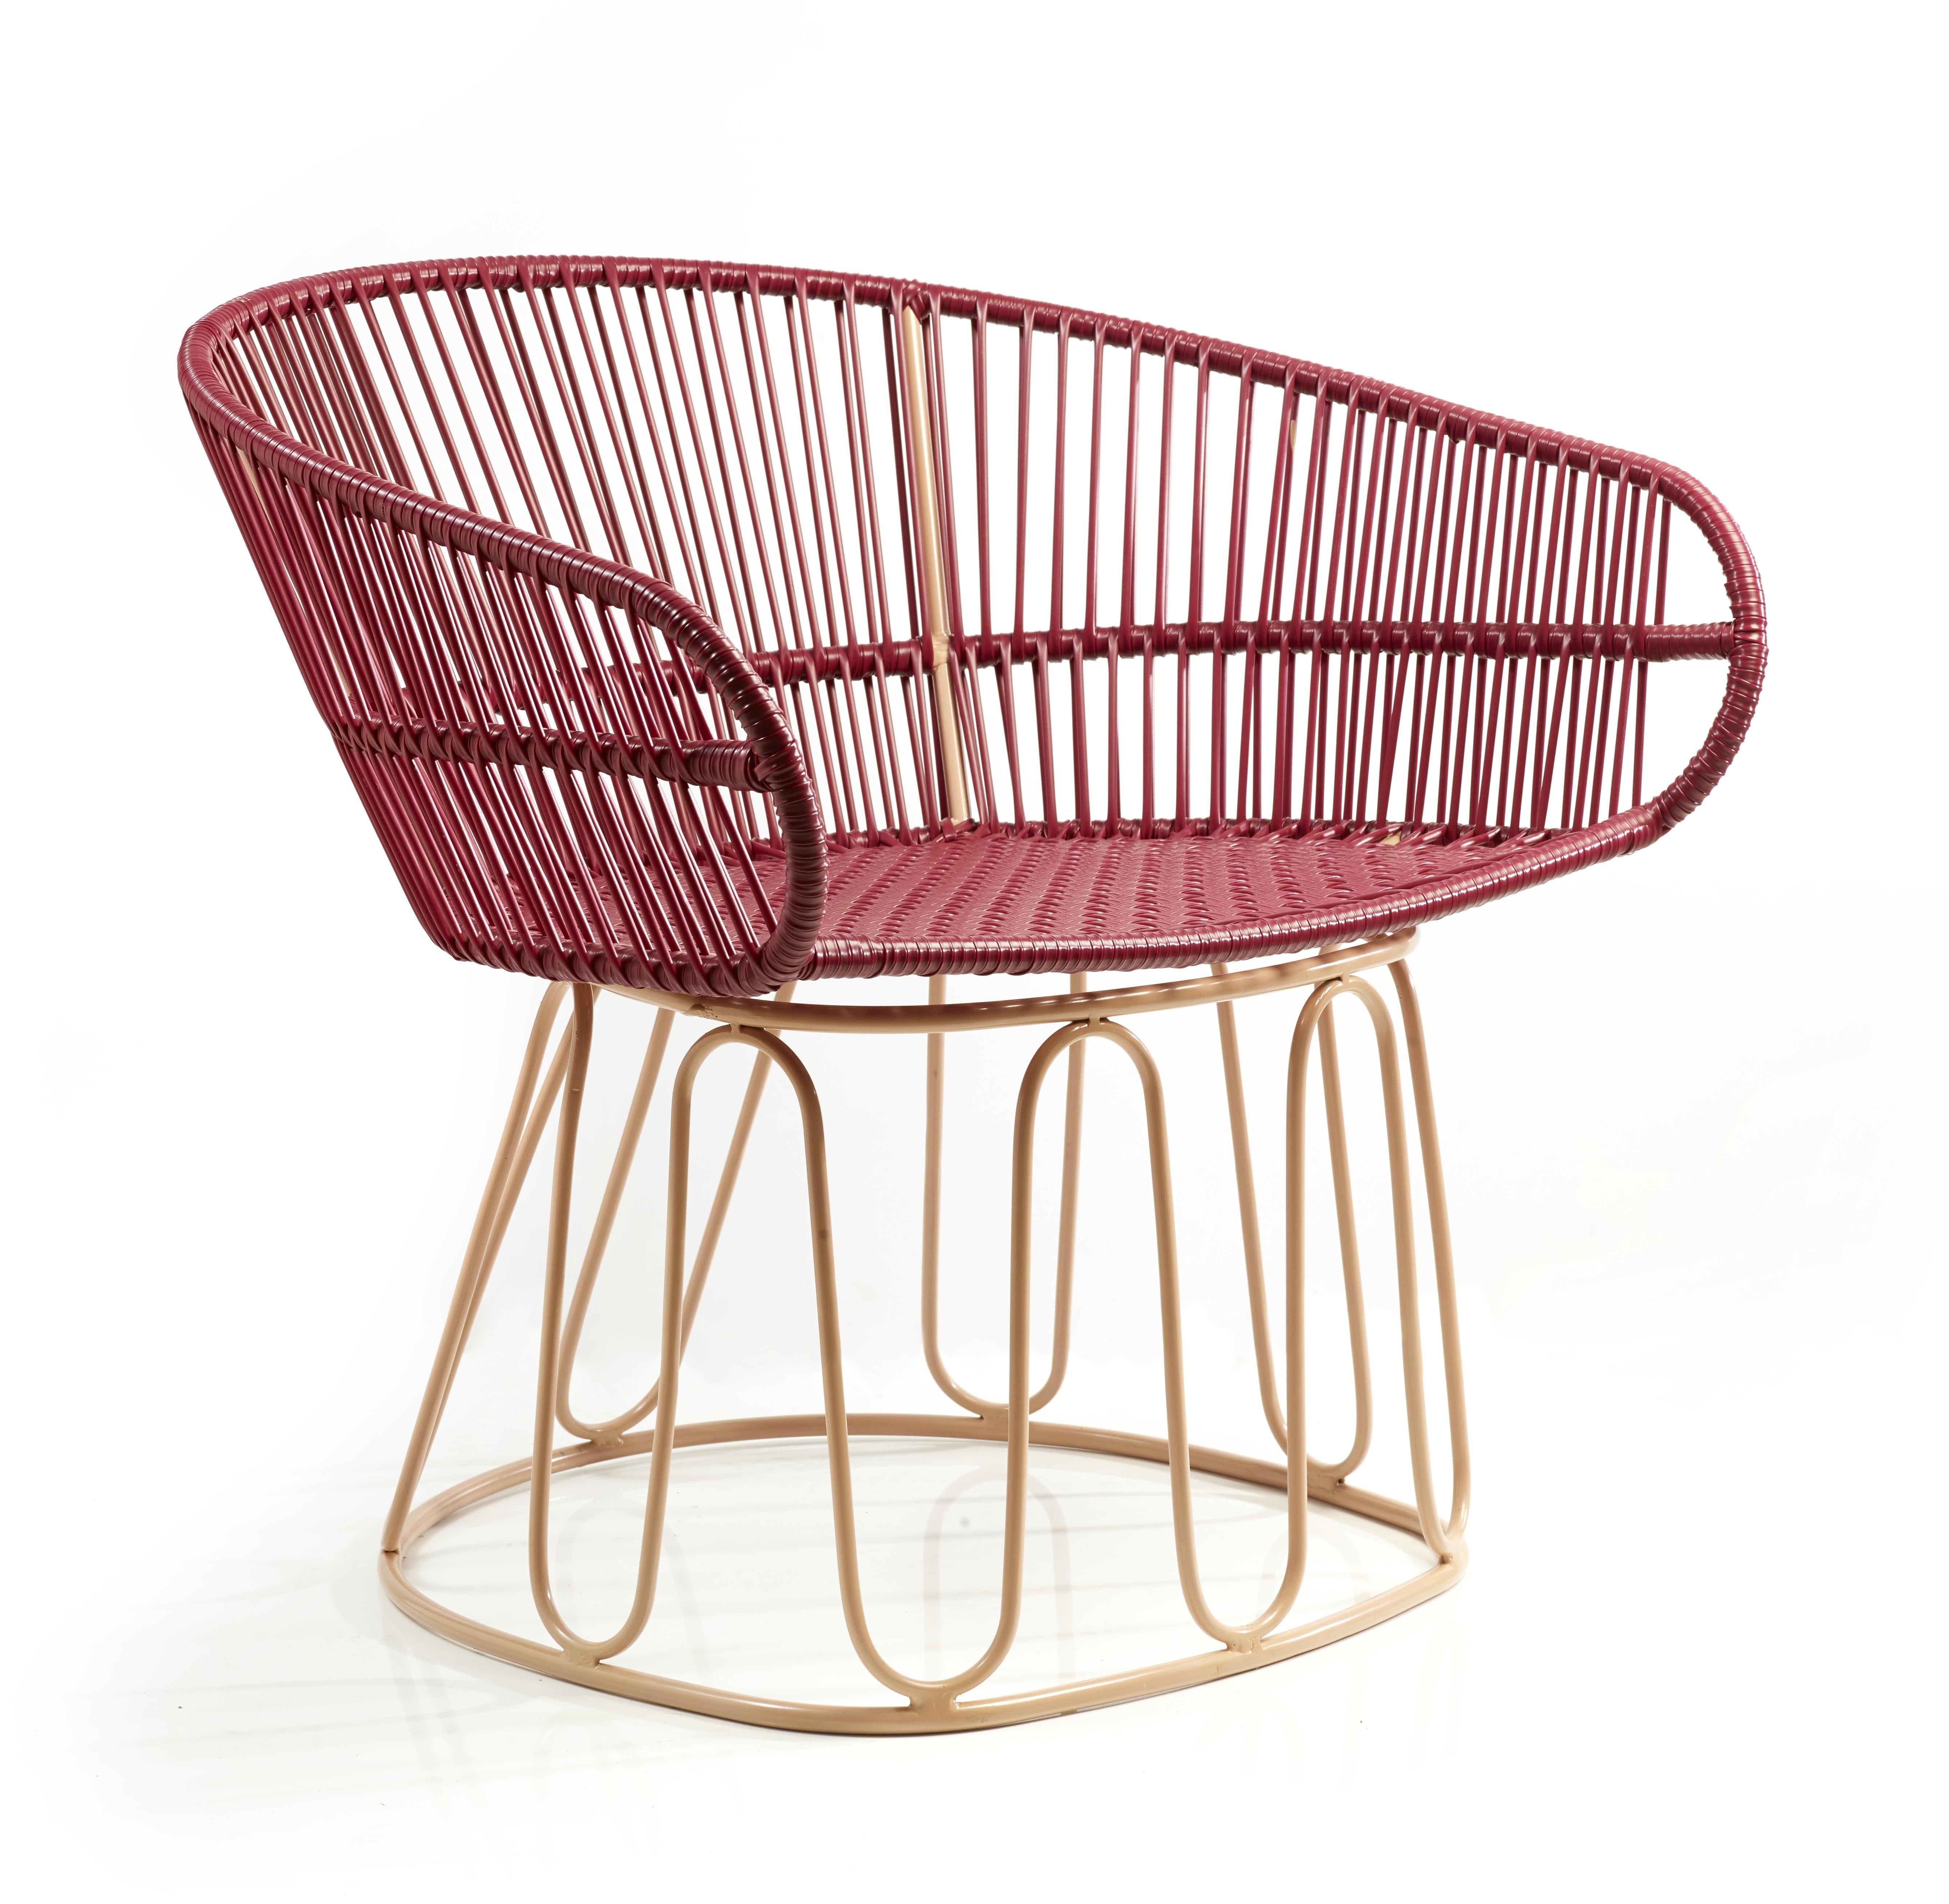 Purple circo lounge chair by Sebastian Herkner.
Materials: Galvanized and powder-coated tubular steel. PVC strings.
Technique: Made from recycled plastic. Weaved by local craftspeople in Colombia. 
Dimensions: W 74 x D 66.2 x H 73 cm 
Available